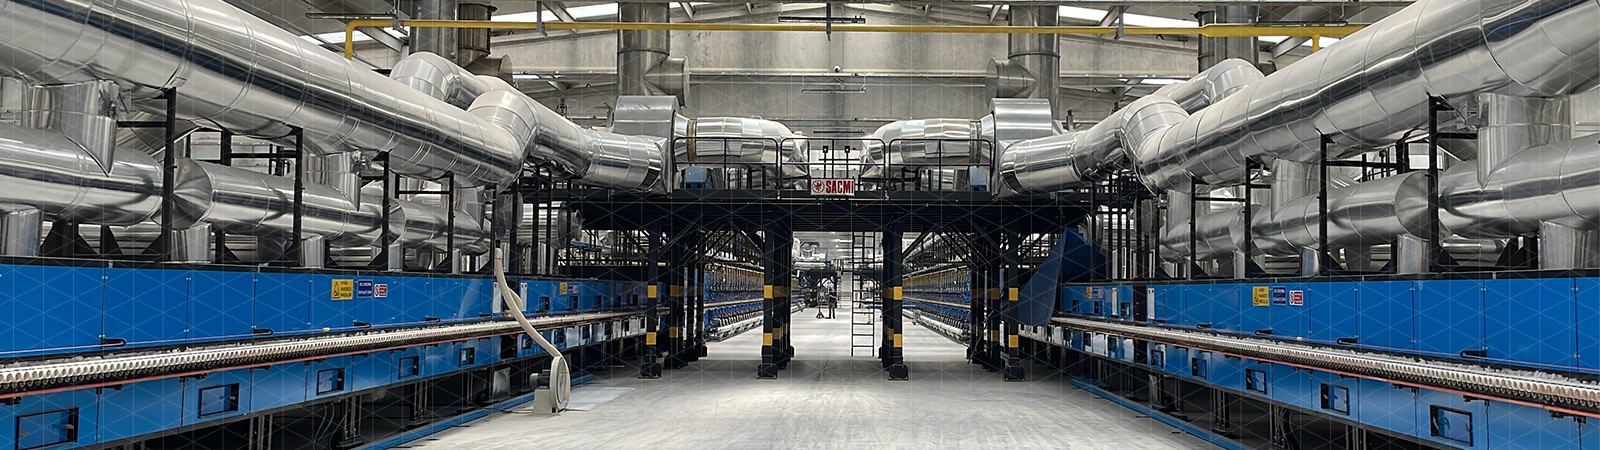 Gural Seramik invests with SACMI: new 6 million m2/year production facility now operational